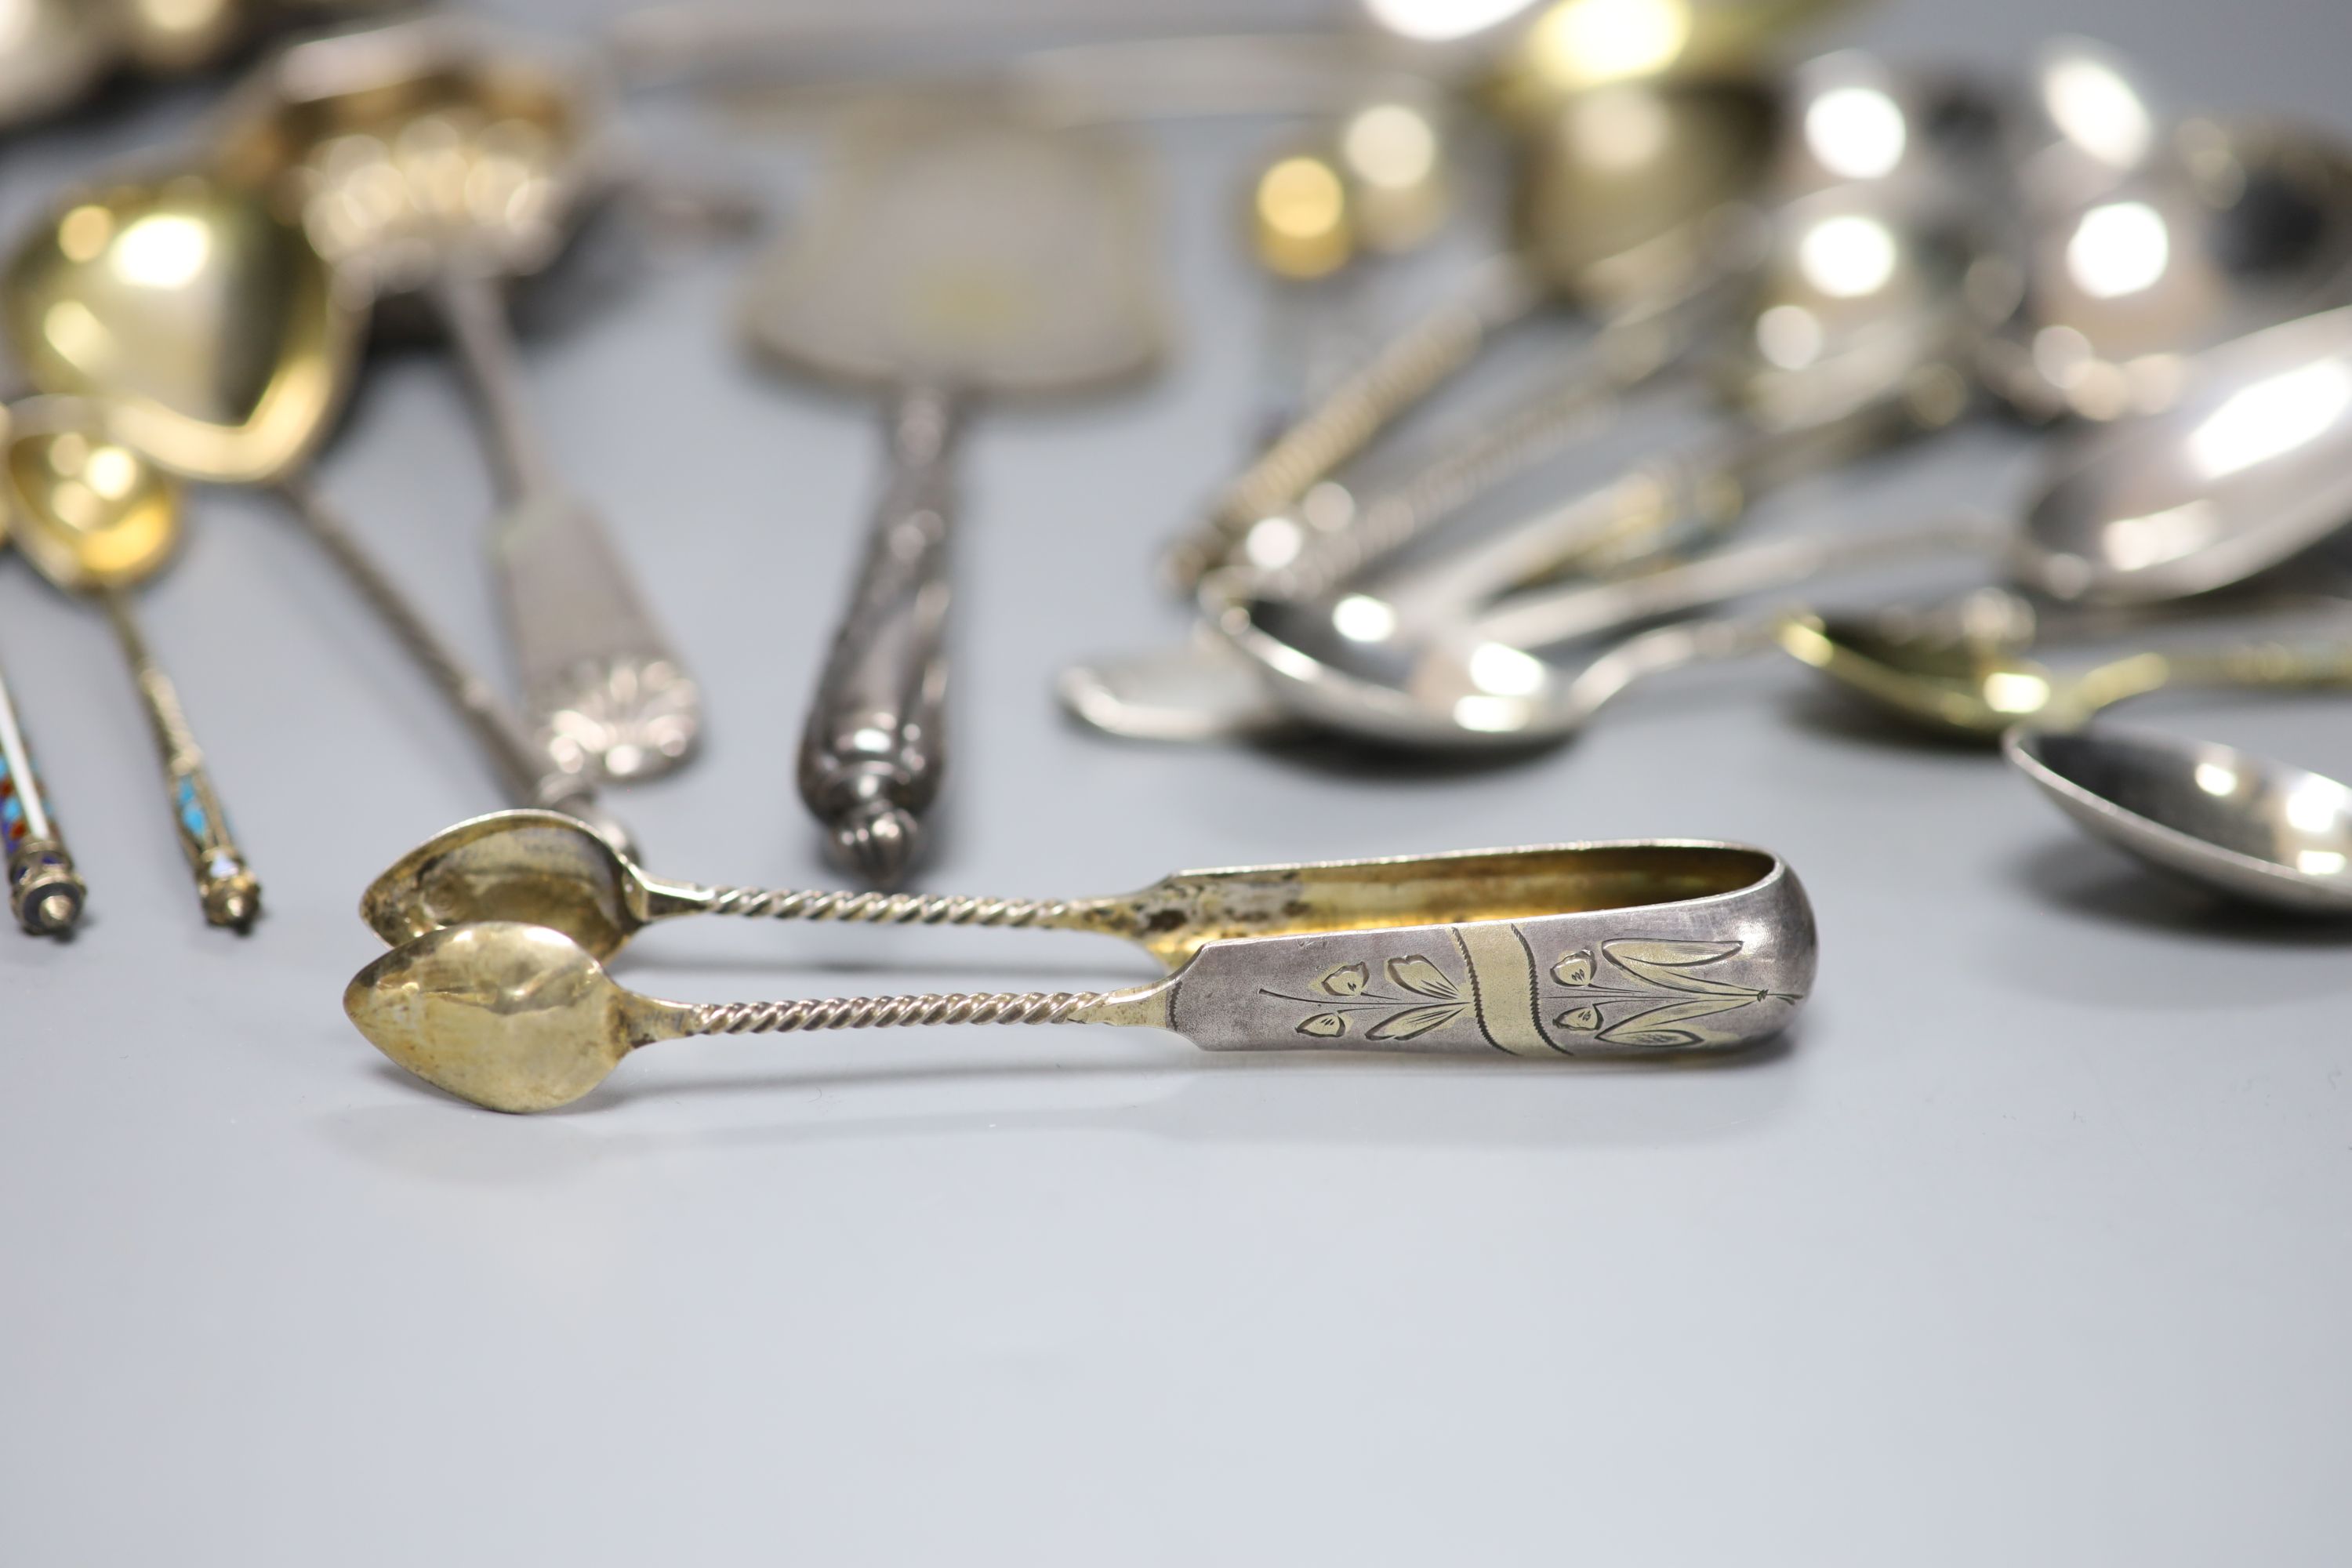 A late 19th century Russian 84 zolotnik tea strainer, a Russian cake slice and sugar sifter and a group of other Russian flatware including enamelled teaspoons